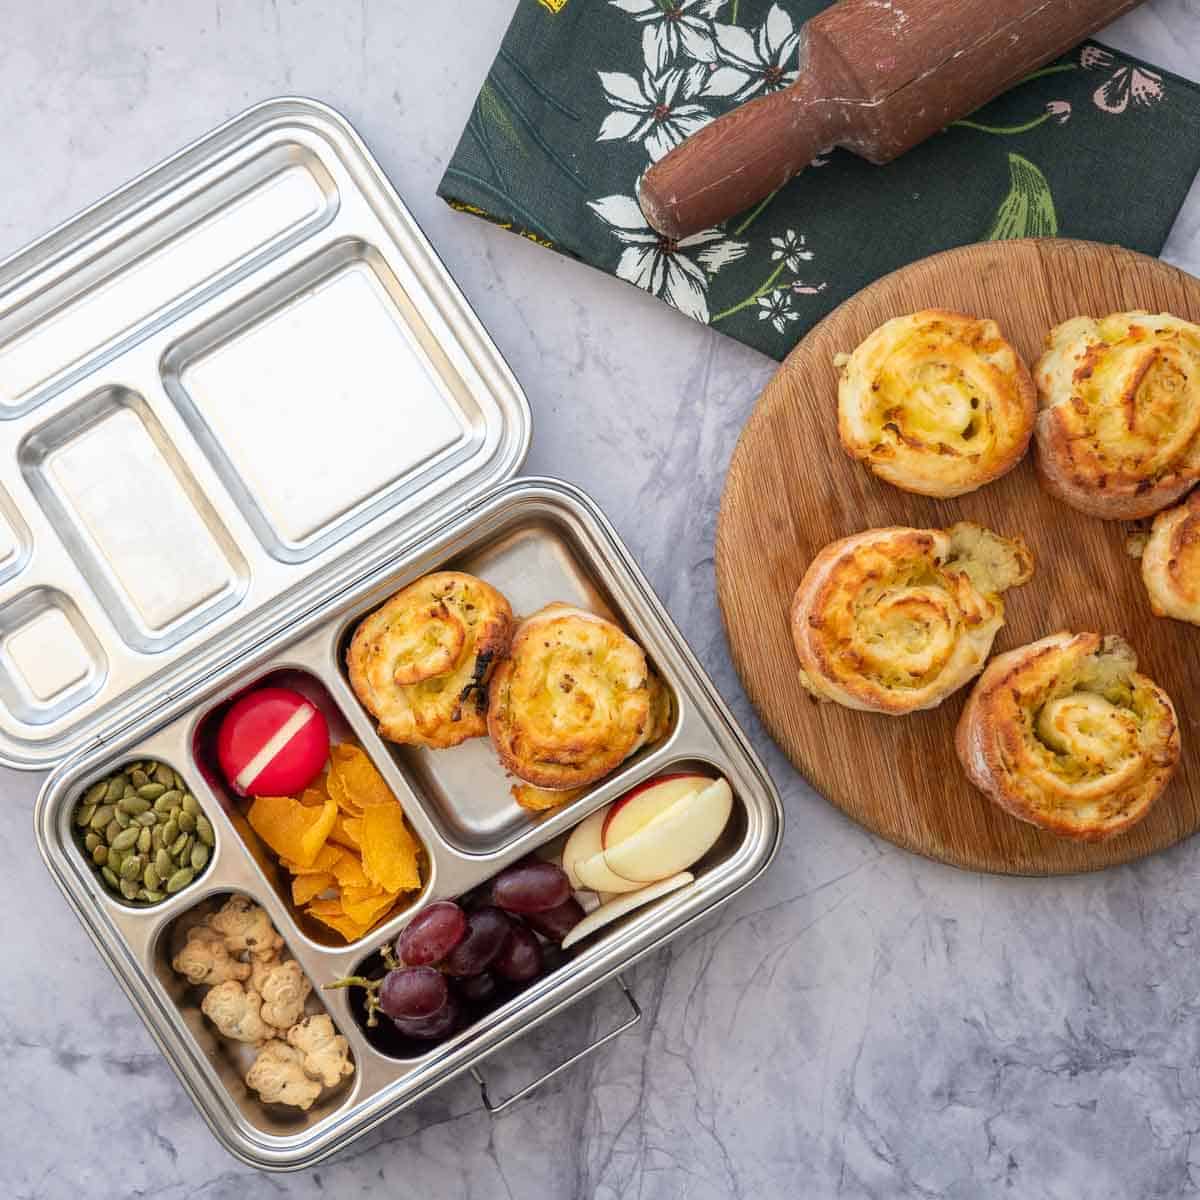 Gluten free scrolls packed into a stainless steel lunch box with other lunch box items.